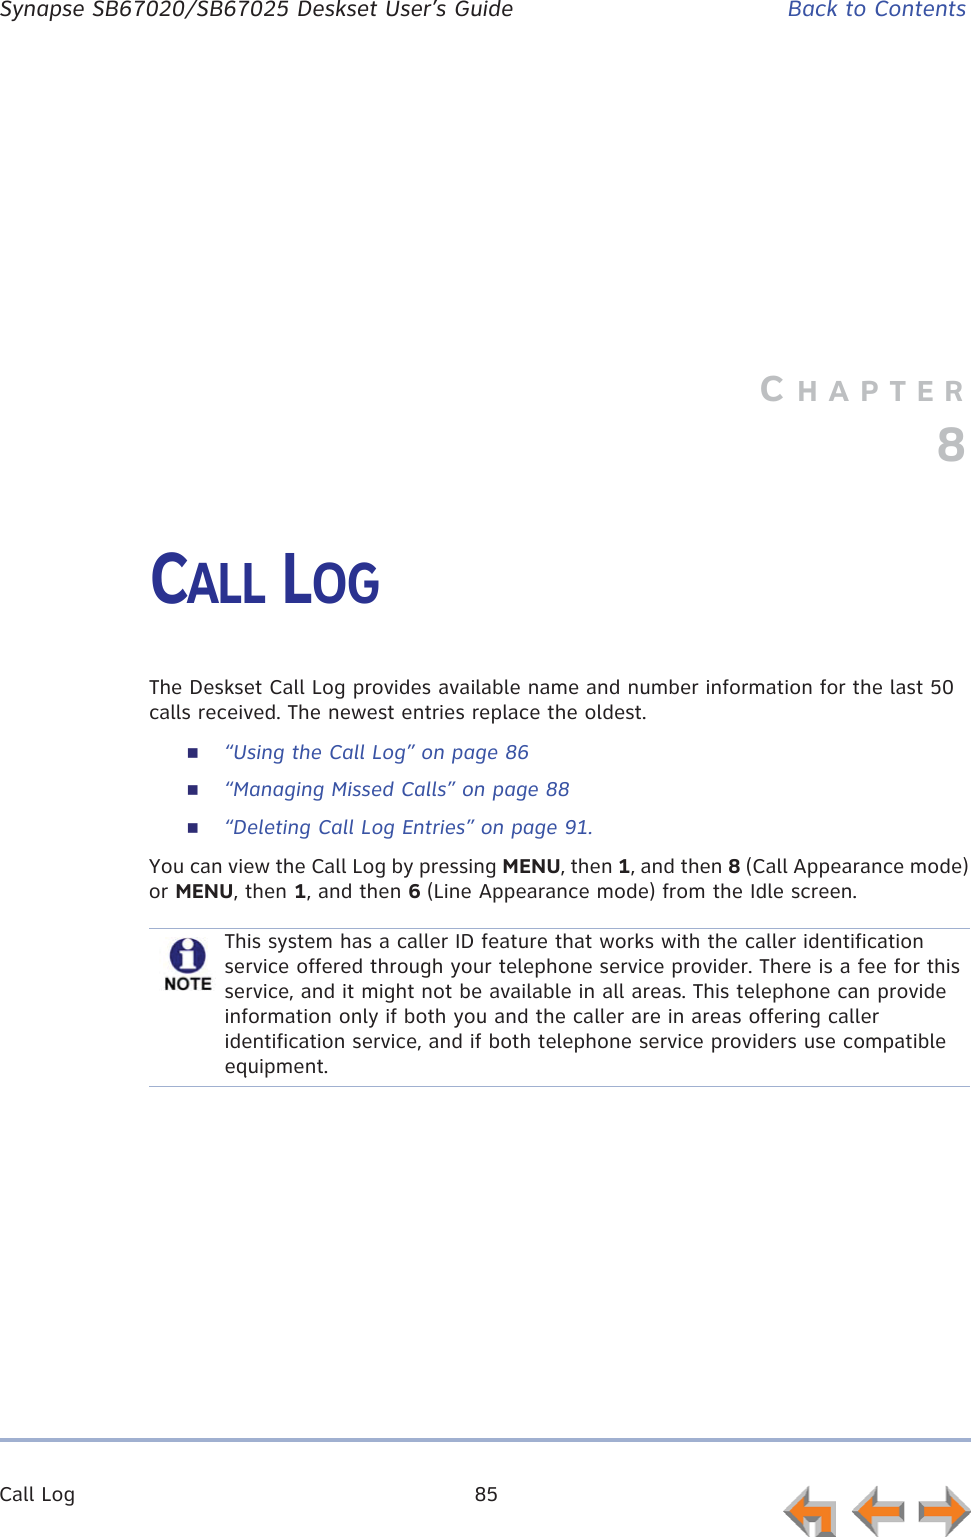 Call Log 85      Synapse SB67020/SB67025 Deskset User’s Guide Back to ContentsCHAPTER8CALL LOGThe Deskset Call Log provides available name and number information for the last 50 calls received. The newest entries replace the oldest.“Using the Call Log” on page 86“Managing Missed Calls” on page 88“Deleting Call Log Entries” on page 91.You can view the Call Log by pressing MENU, then 1, and then 8 (Call Appearance mode) or MENU, then 1, and then 6 (Line Appearance mode) from the Idle screen.This system has a caller ID feature that works with the caller identification service offered through your telephone service provider. There is a fee for this service, and it might not be available in all areas. This telephone can provide information only if both you and the caller are in areas offering caller identification service, and if both telephone service providers use compatible equipment.